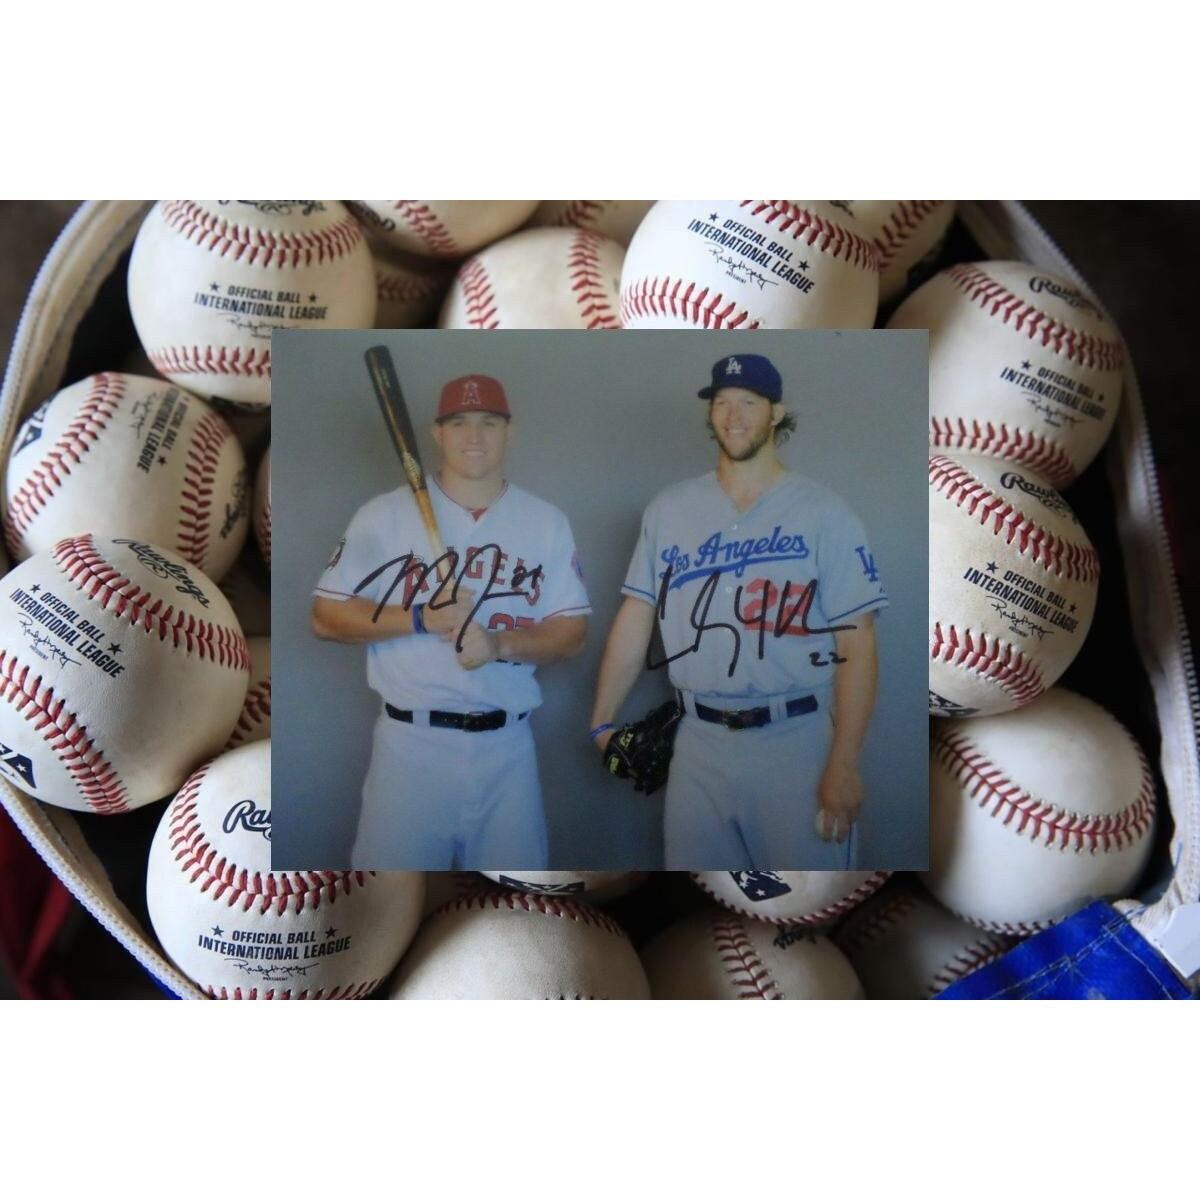 Mike Trout and Clayton Kershaw 8 by 10 signed photo with proof